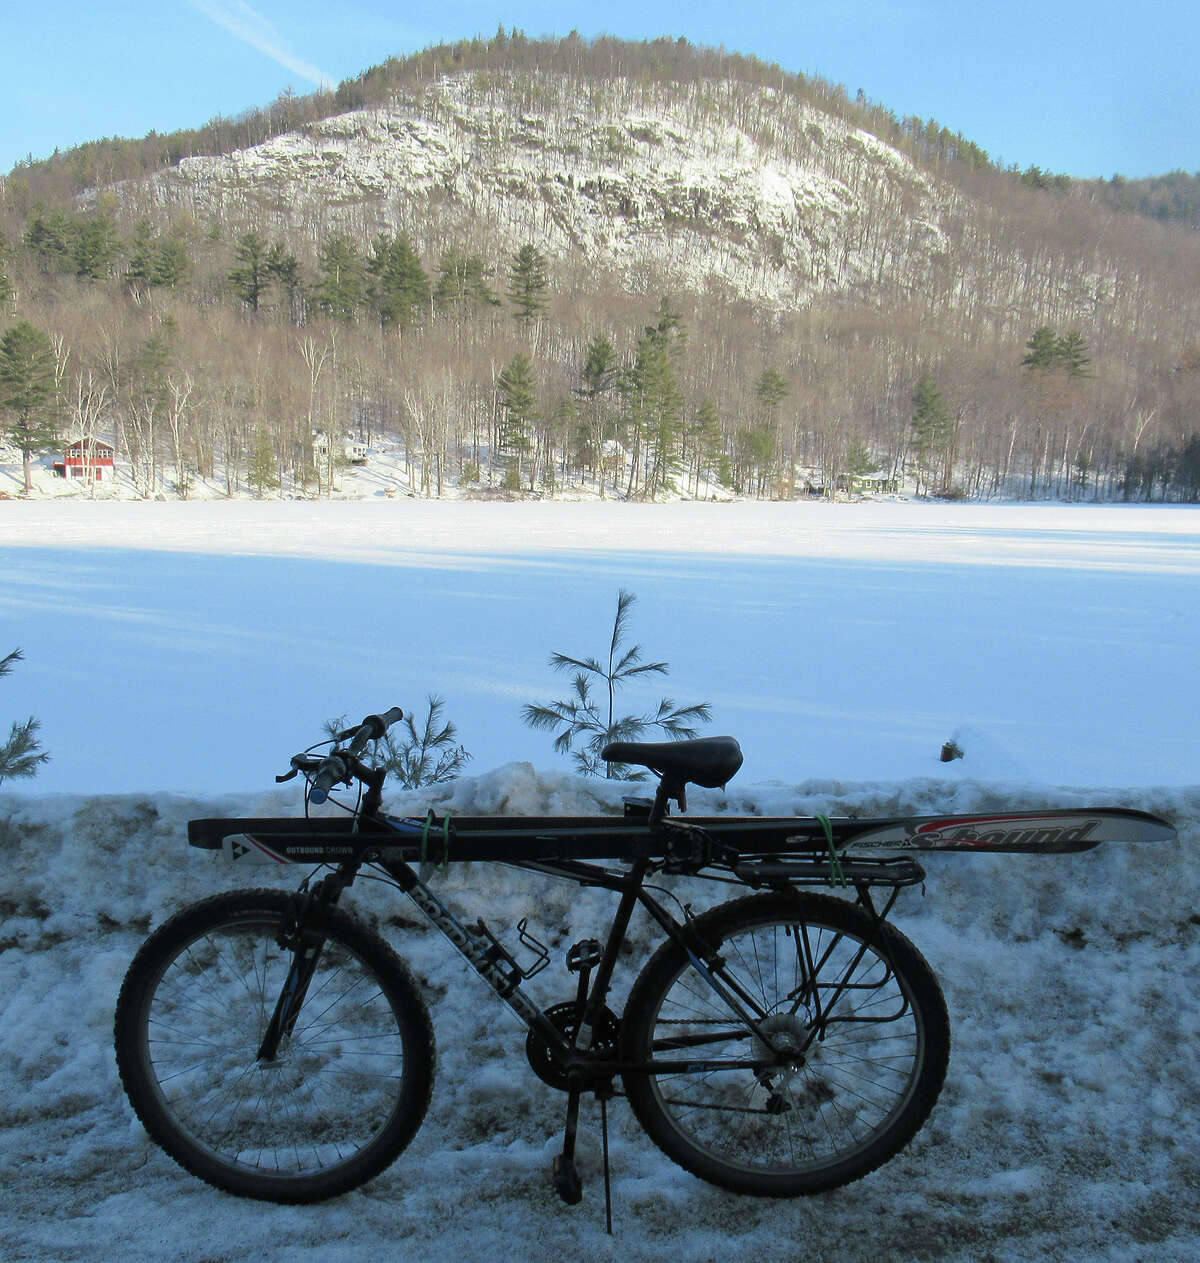 Skis on bike with Park Mountain in the Pharaoh Lake Wilderness behind. (Herb Terns / Times Union)